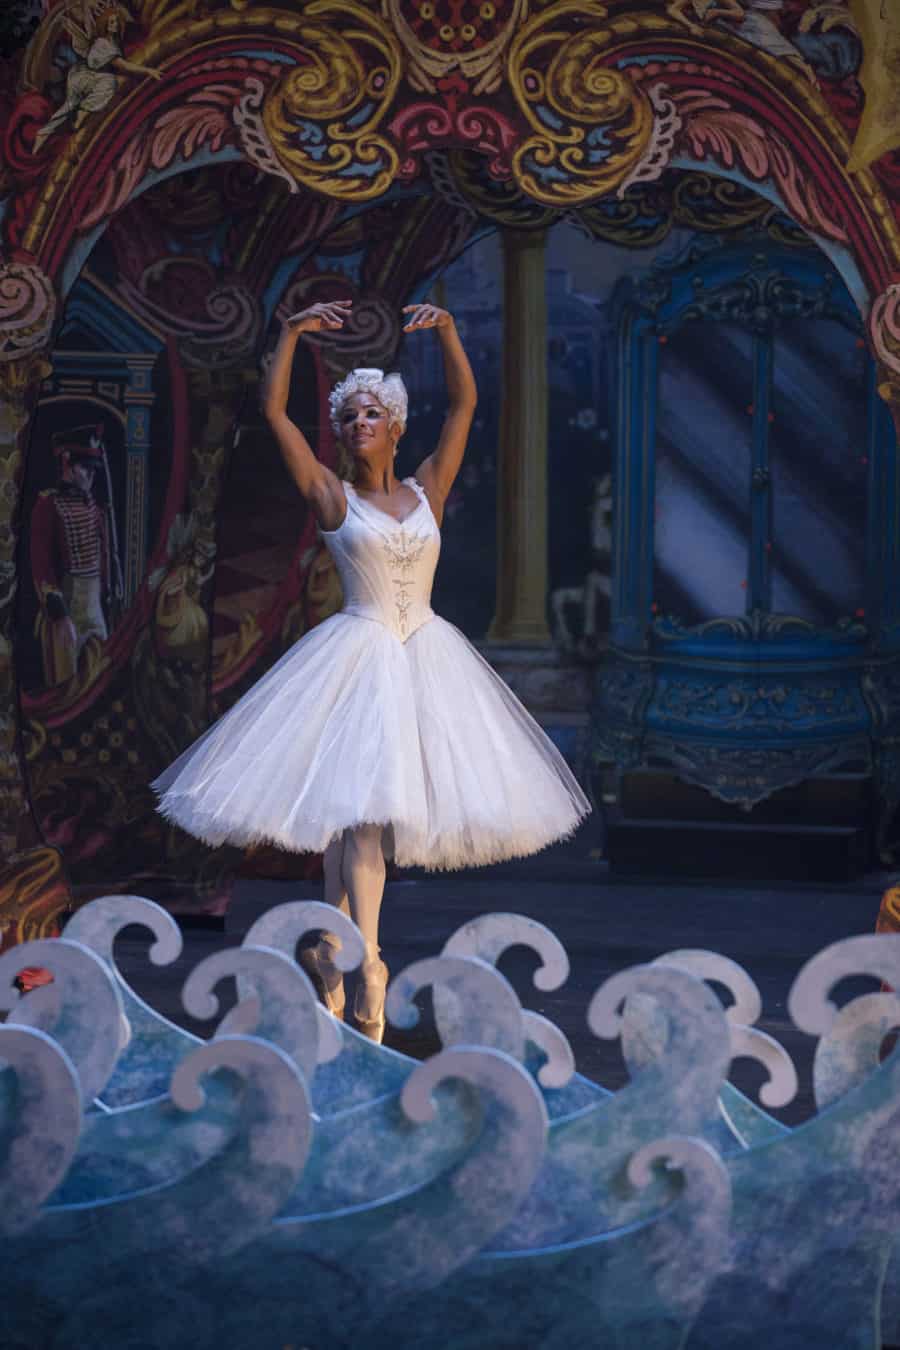 Misty Copeland is the Ballerina Princess in Disney’s THE NUTCRACKER AND THE FOUR REALMS.